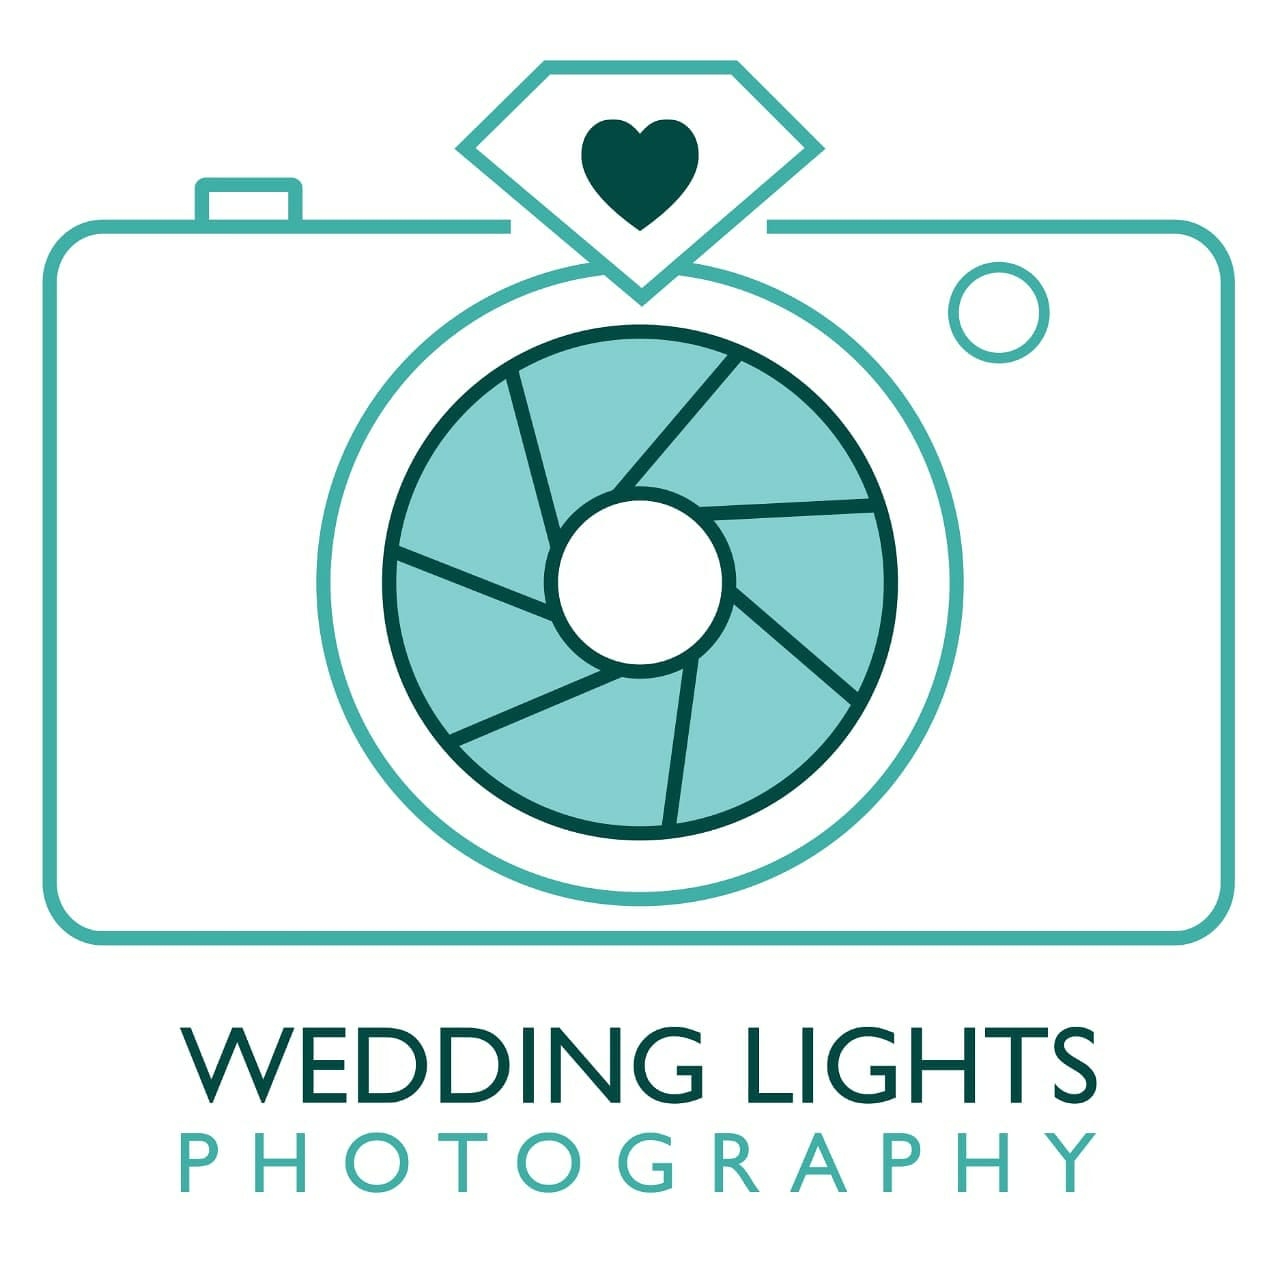 wedding lights photography|Catering Services|Event Services